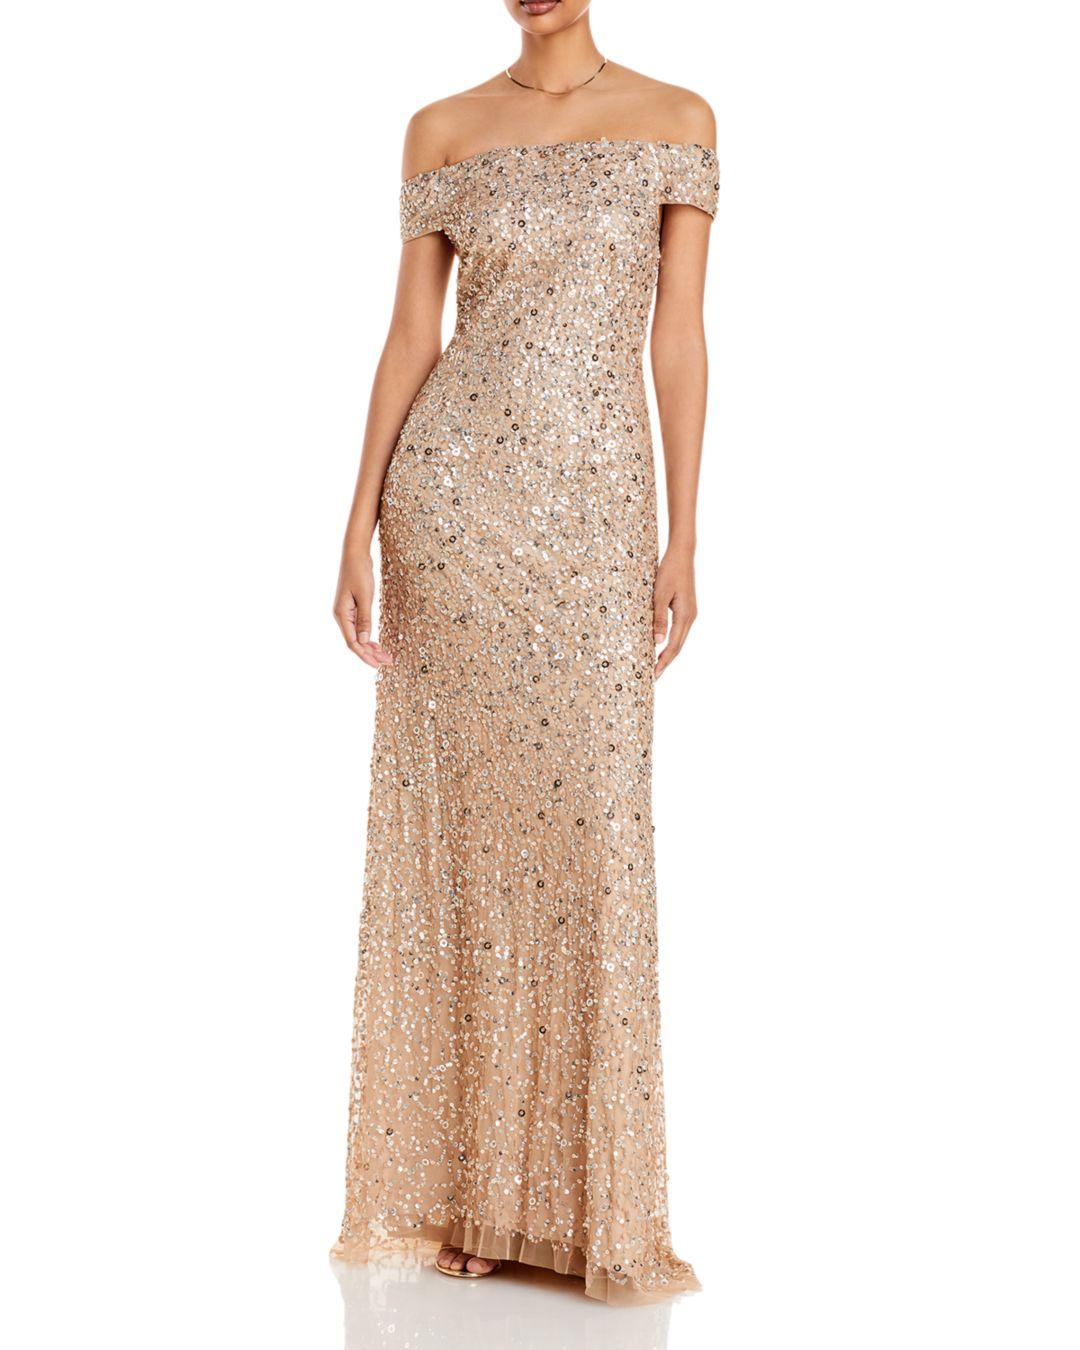 Adrianna Papell Off - The - Shoulder Sequined Gown in Champagne (Metallic)  | Lyst